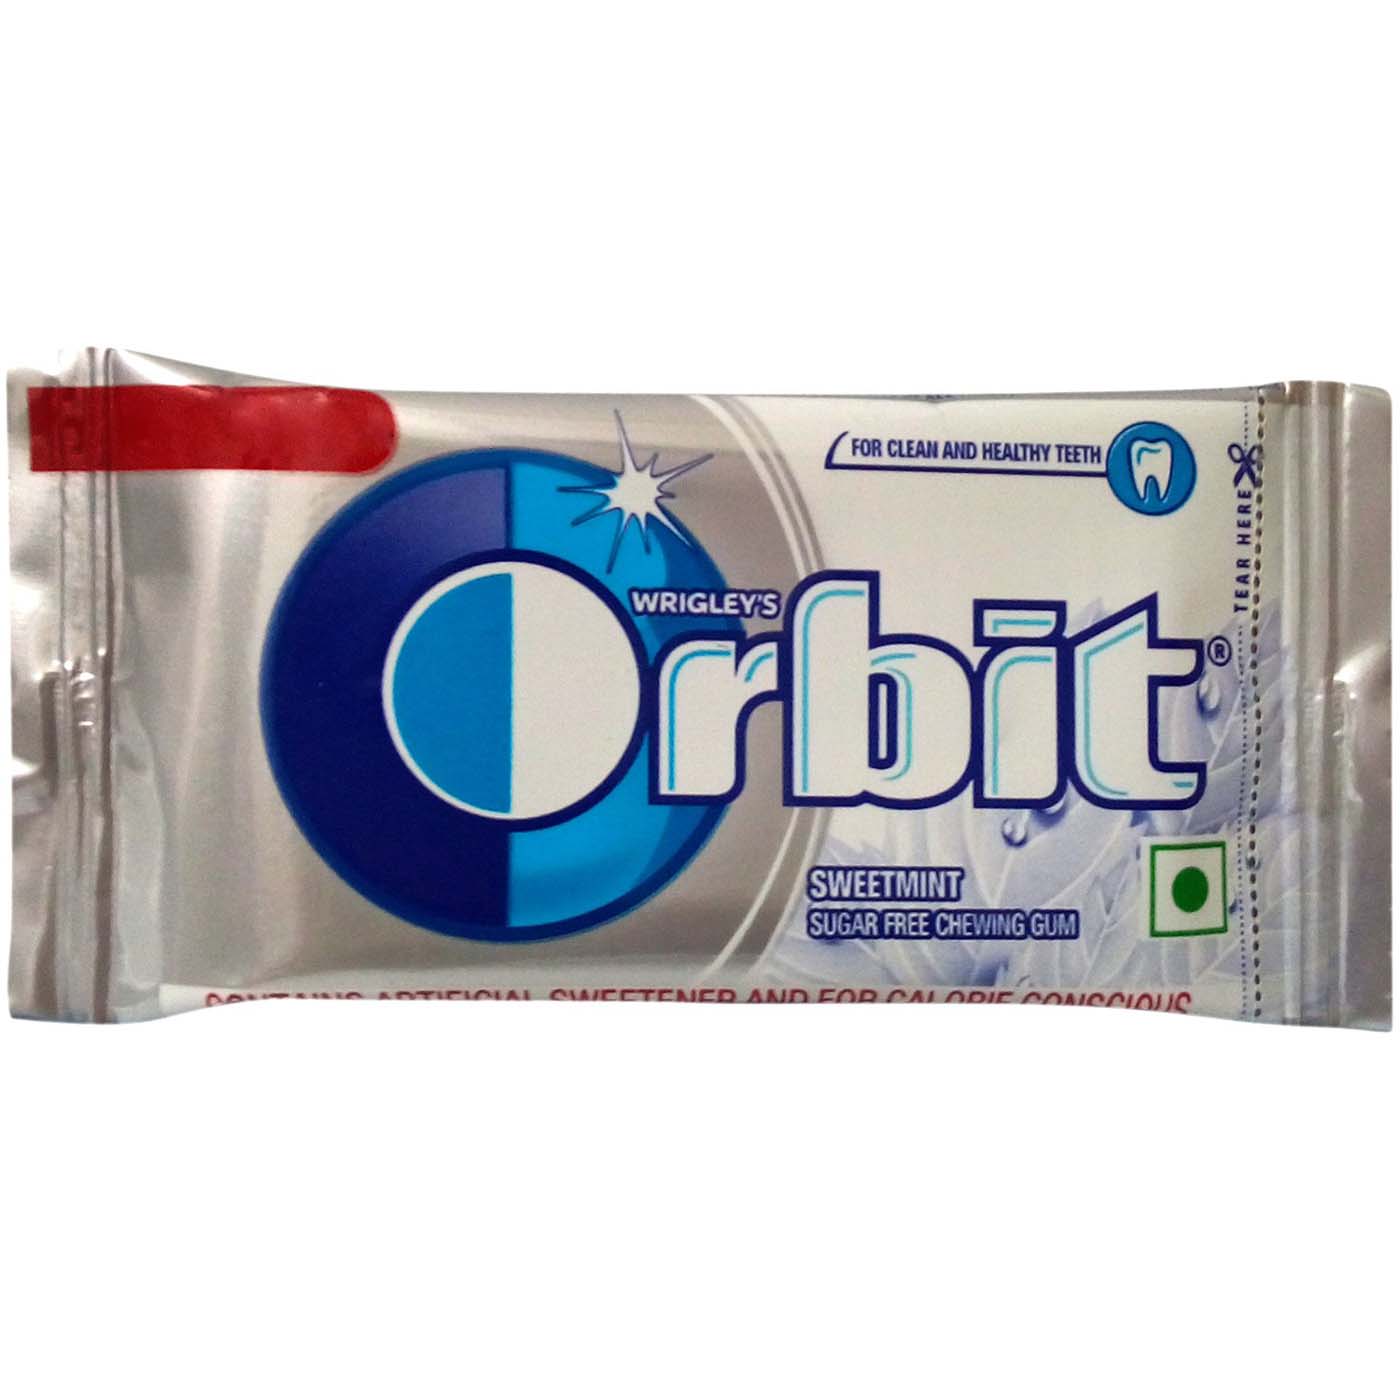 Orbit Chewing Gum - Sweetmint, 4.4g Pack